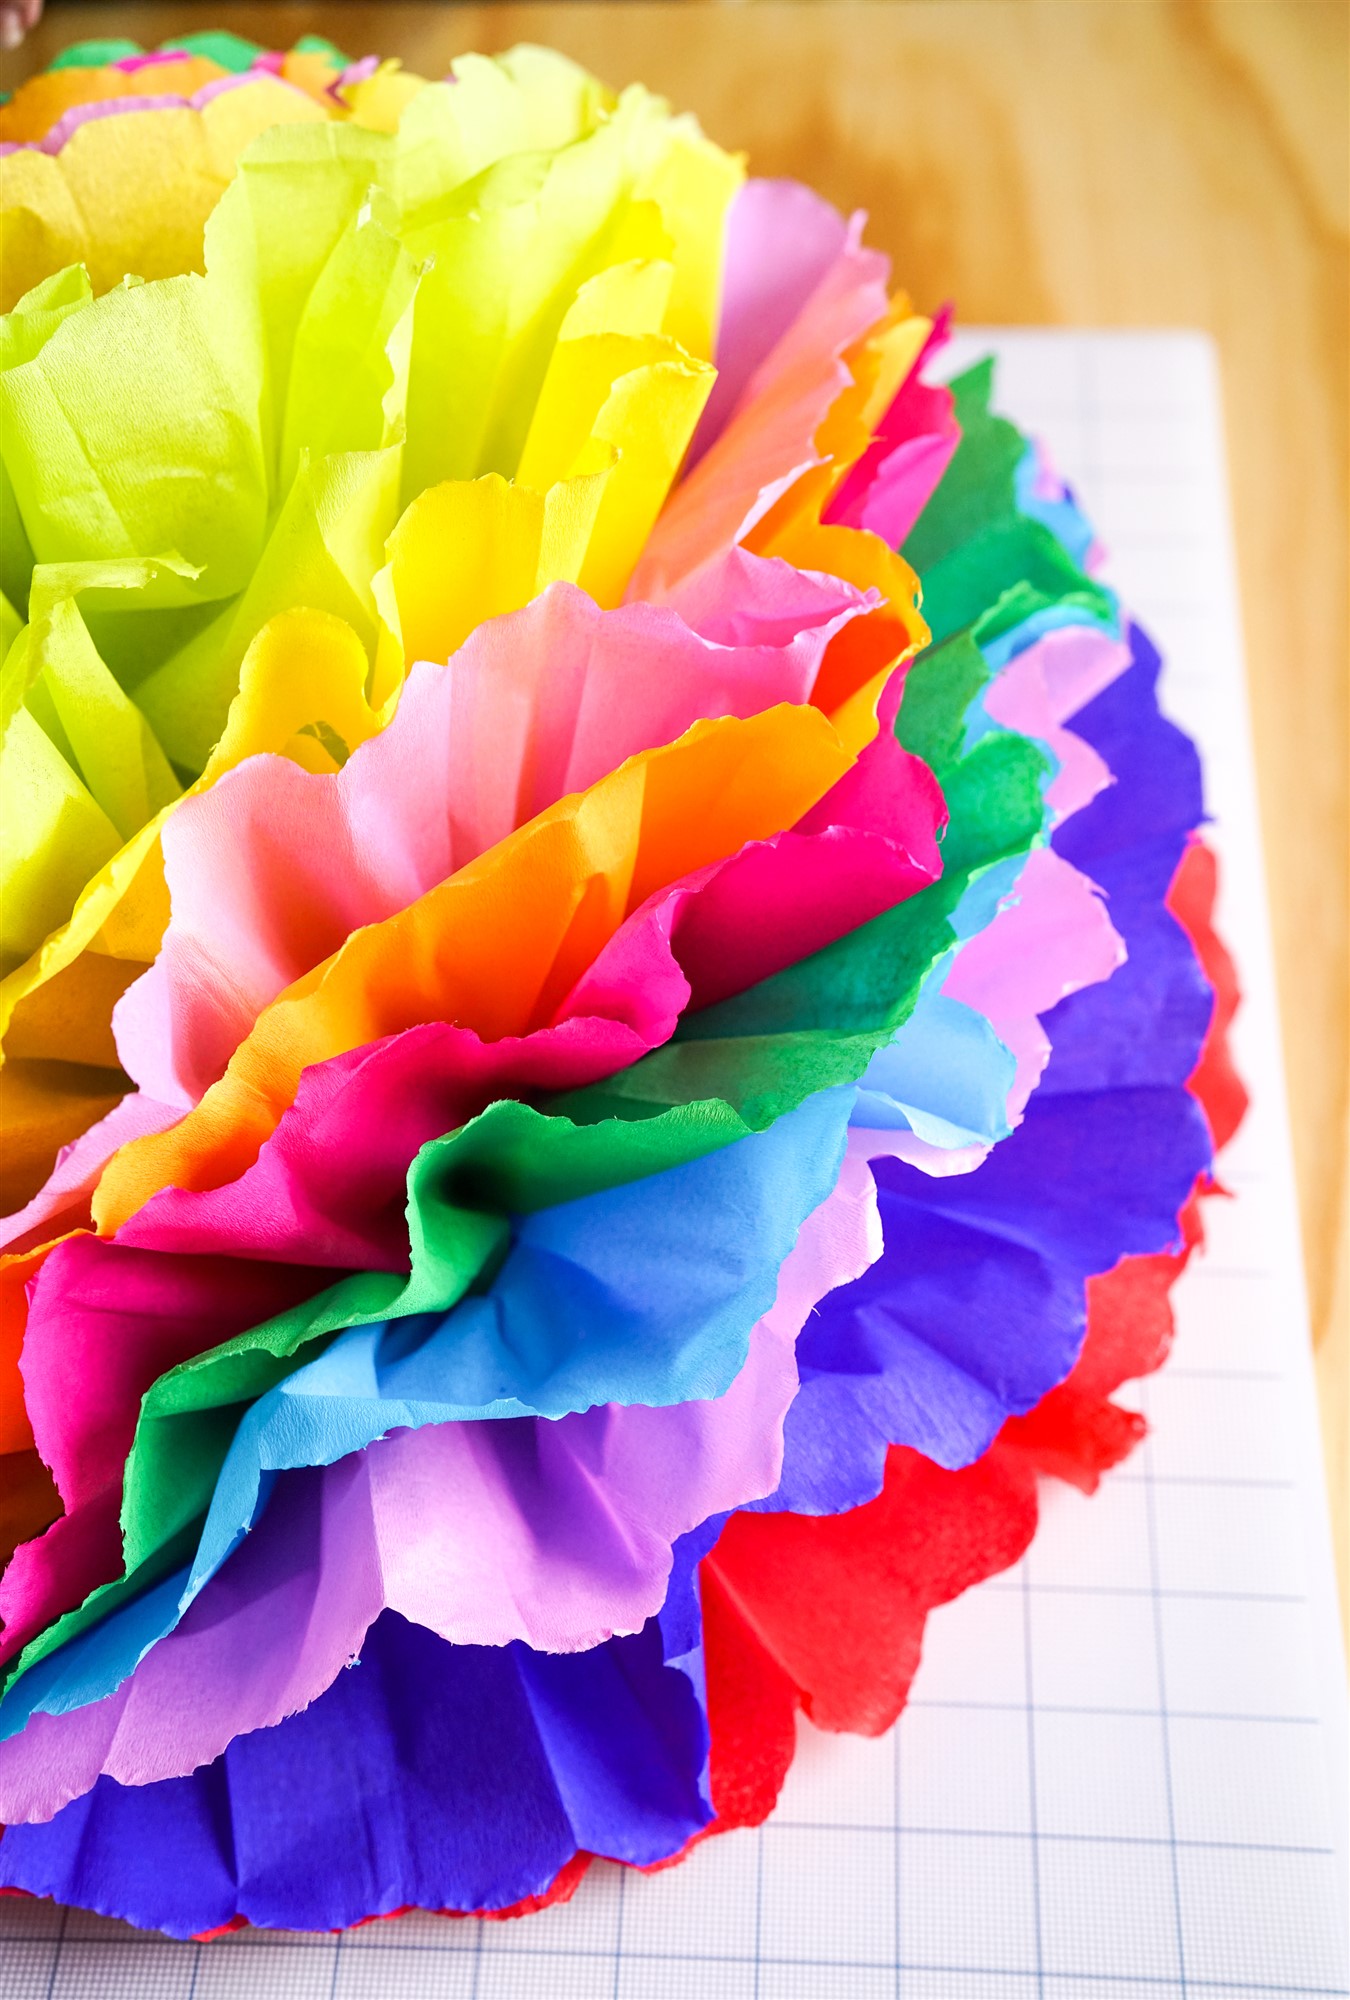 10 of Our Most Beautiful Tissue and Crepe Paper Crafts